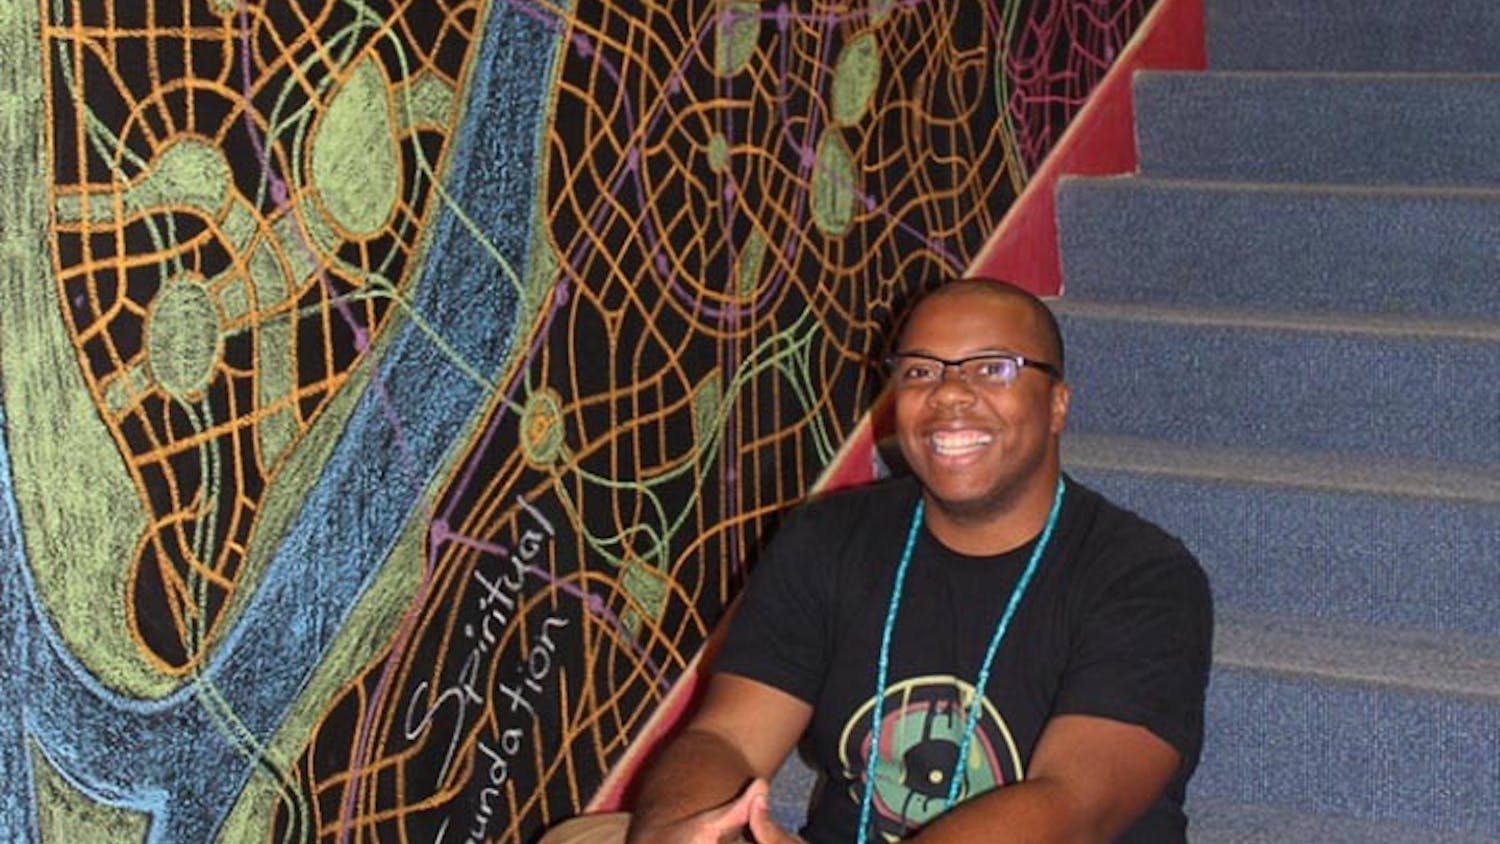 Michael Dantzler sits next to his mural, “Transcend Map,” which is a temporary mural he made in October 2016 for the University of South Carolina School of Music’s library.